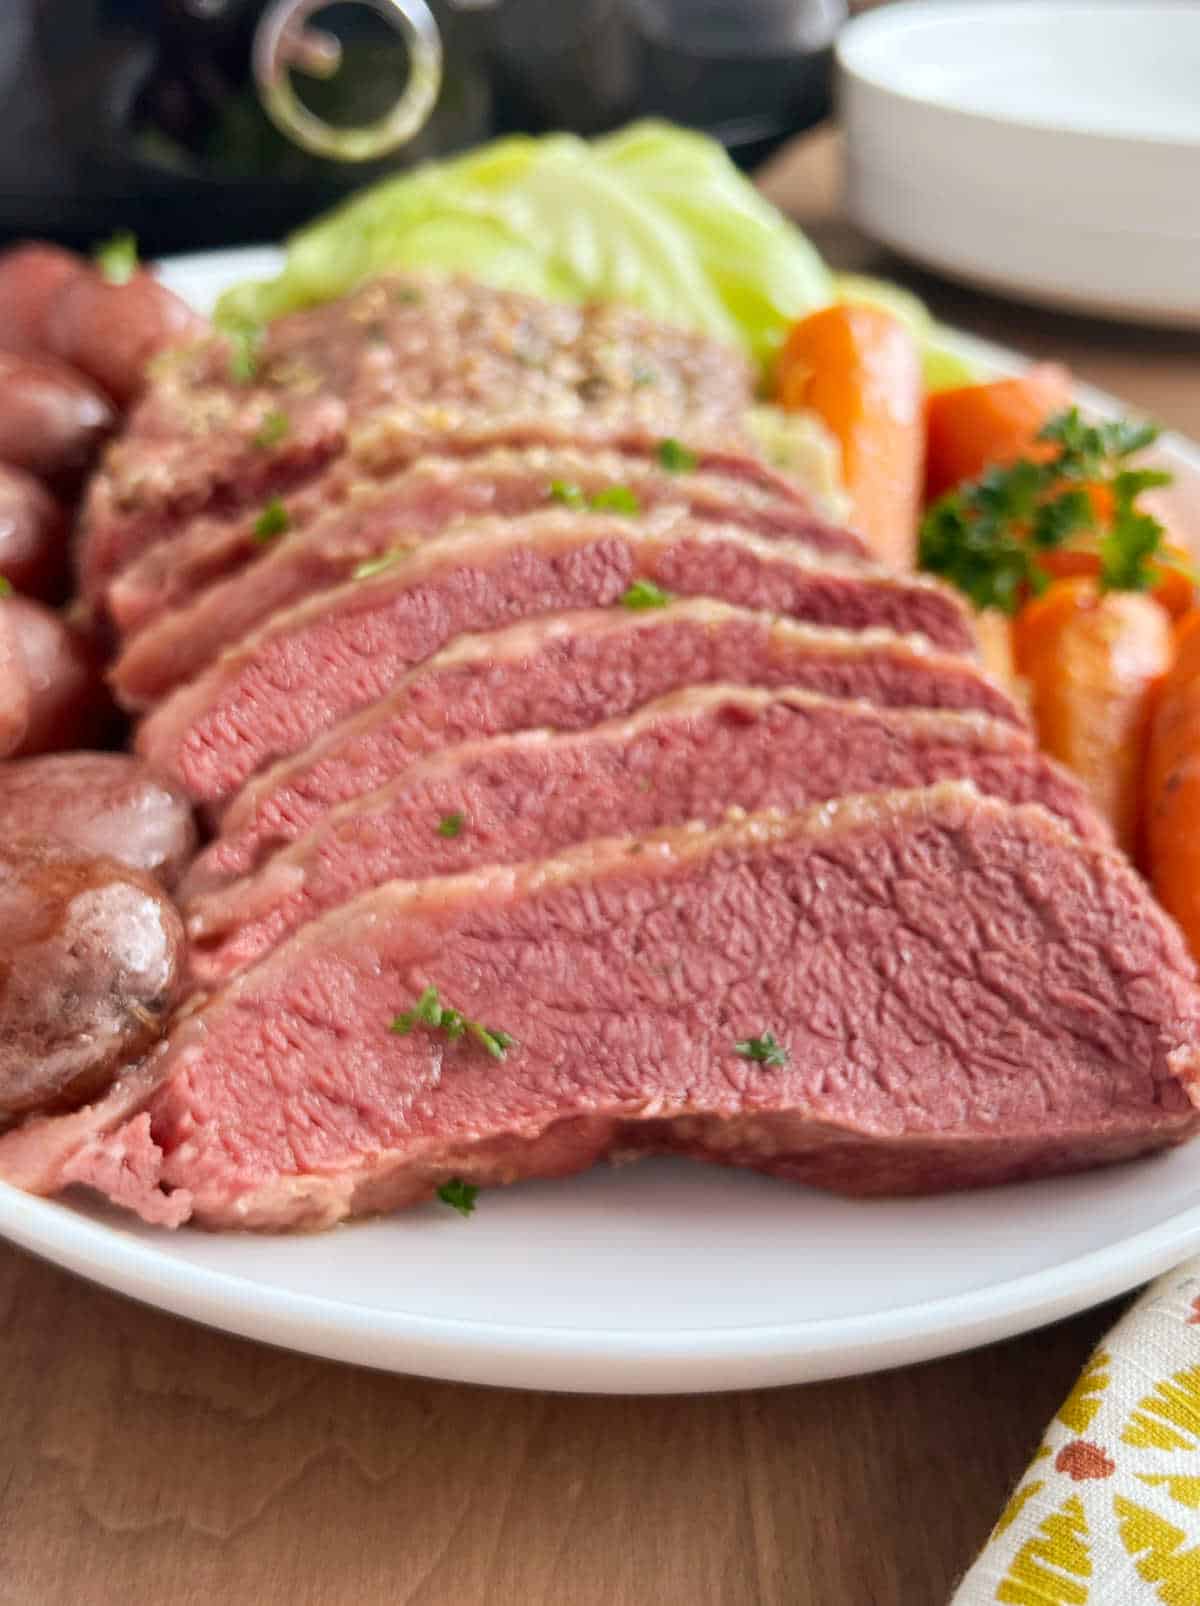 platter with sliced corned beef and vegetables by crockpot